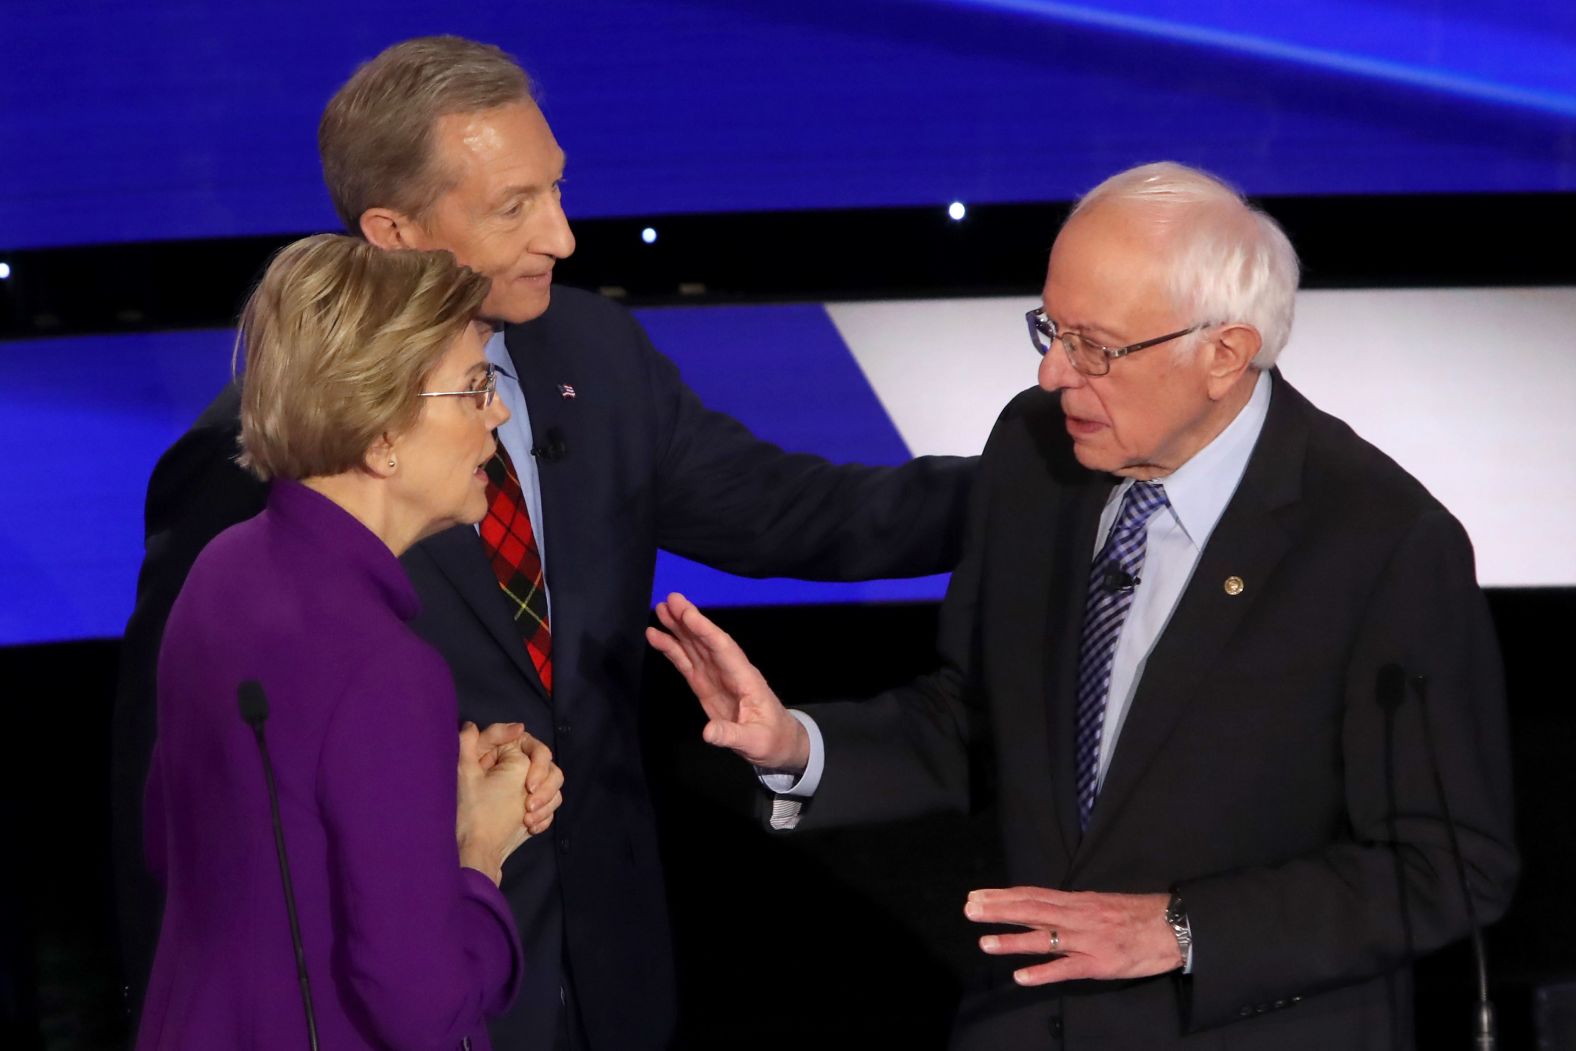 In a <a href="index.php?page=&url=https%3A%2F%2Fwww.cnn.com%2F2020%2F01%2F15%2Fpolitics%2Fbernie-sanders-elizabeth-warren-debate-audio%2Findex.html" target="_blank">tense and dramatic exchange</a> moments after the debate, Warren accused Sanders of calling her a liar on national television. Sanders responded that it was Warren who called him a liar. Earlier in the debate, the two disagreed on whether Sanders told Warren, during a private dinner in 2018, that he didn't believe a woman could win the presidency.